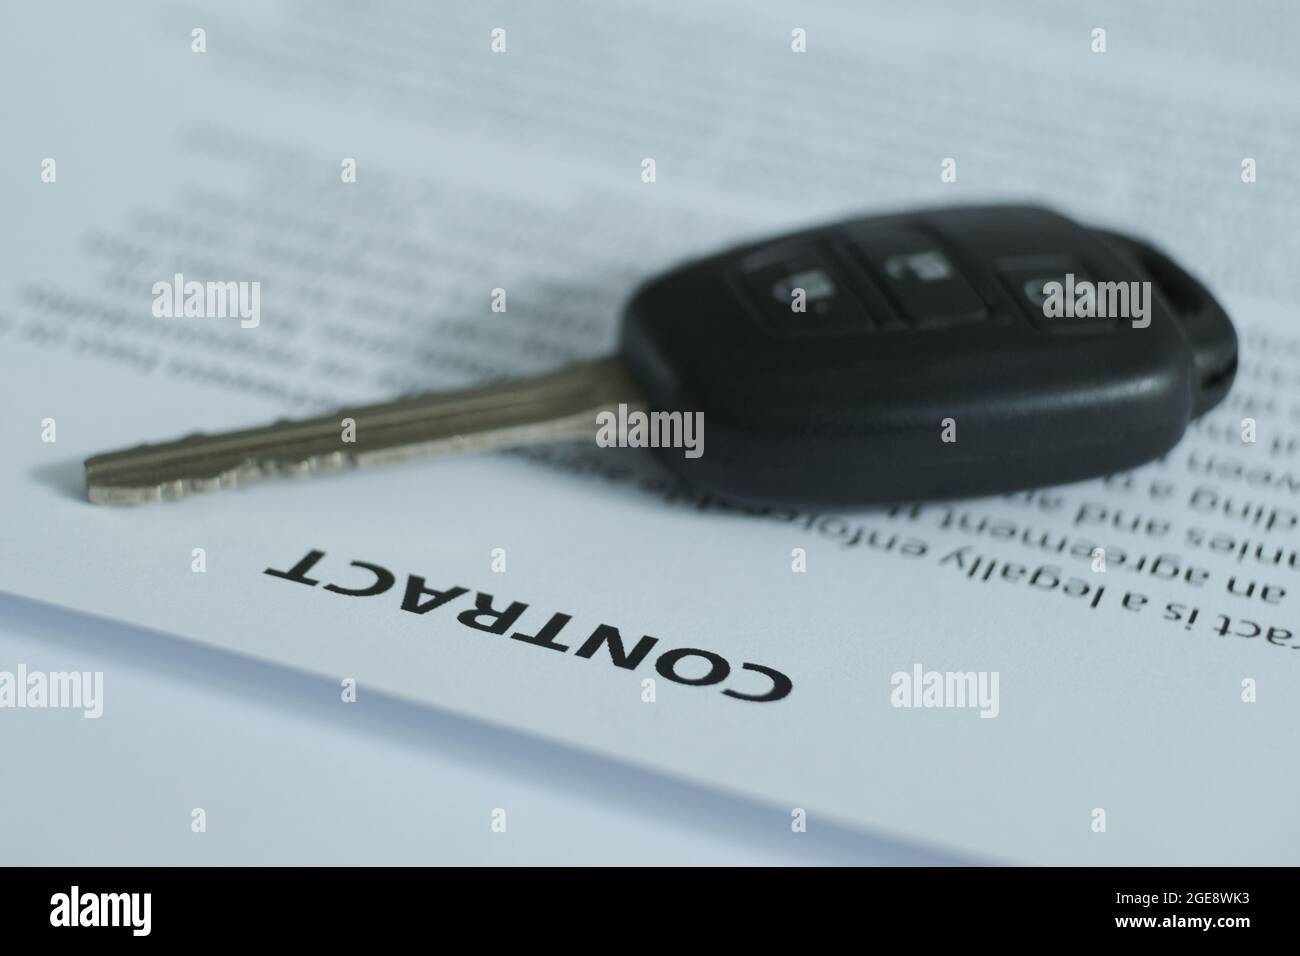 There is a contract and car keys on the table, the emphasis is on the name of the document and the keys.  Blurred image. Stock Photo